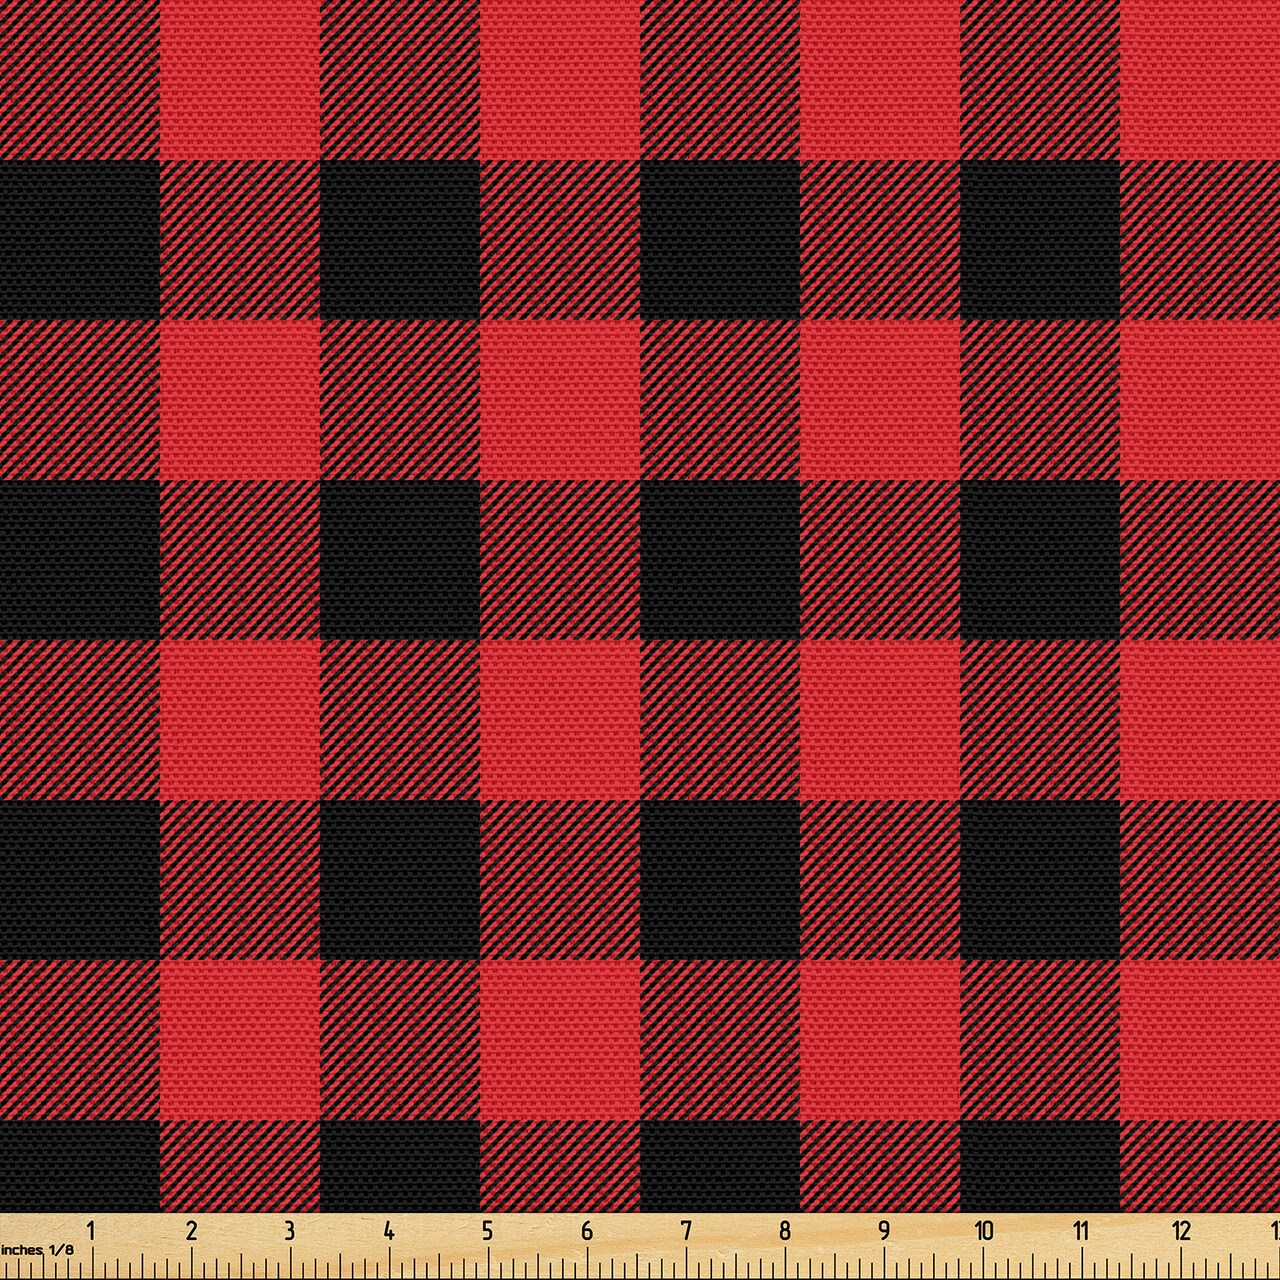 Ambesonne Plaid Fabric by The Yard, Lumberjack Fashion Buffalo Checks Pattern Retro Style Grid Composition, Decorative Fabric for Upholstery and Home Accents, 3 Yards, Orange Black